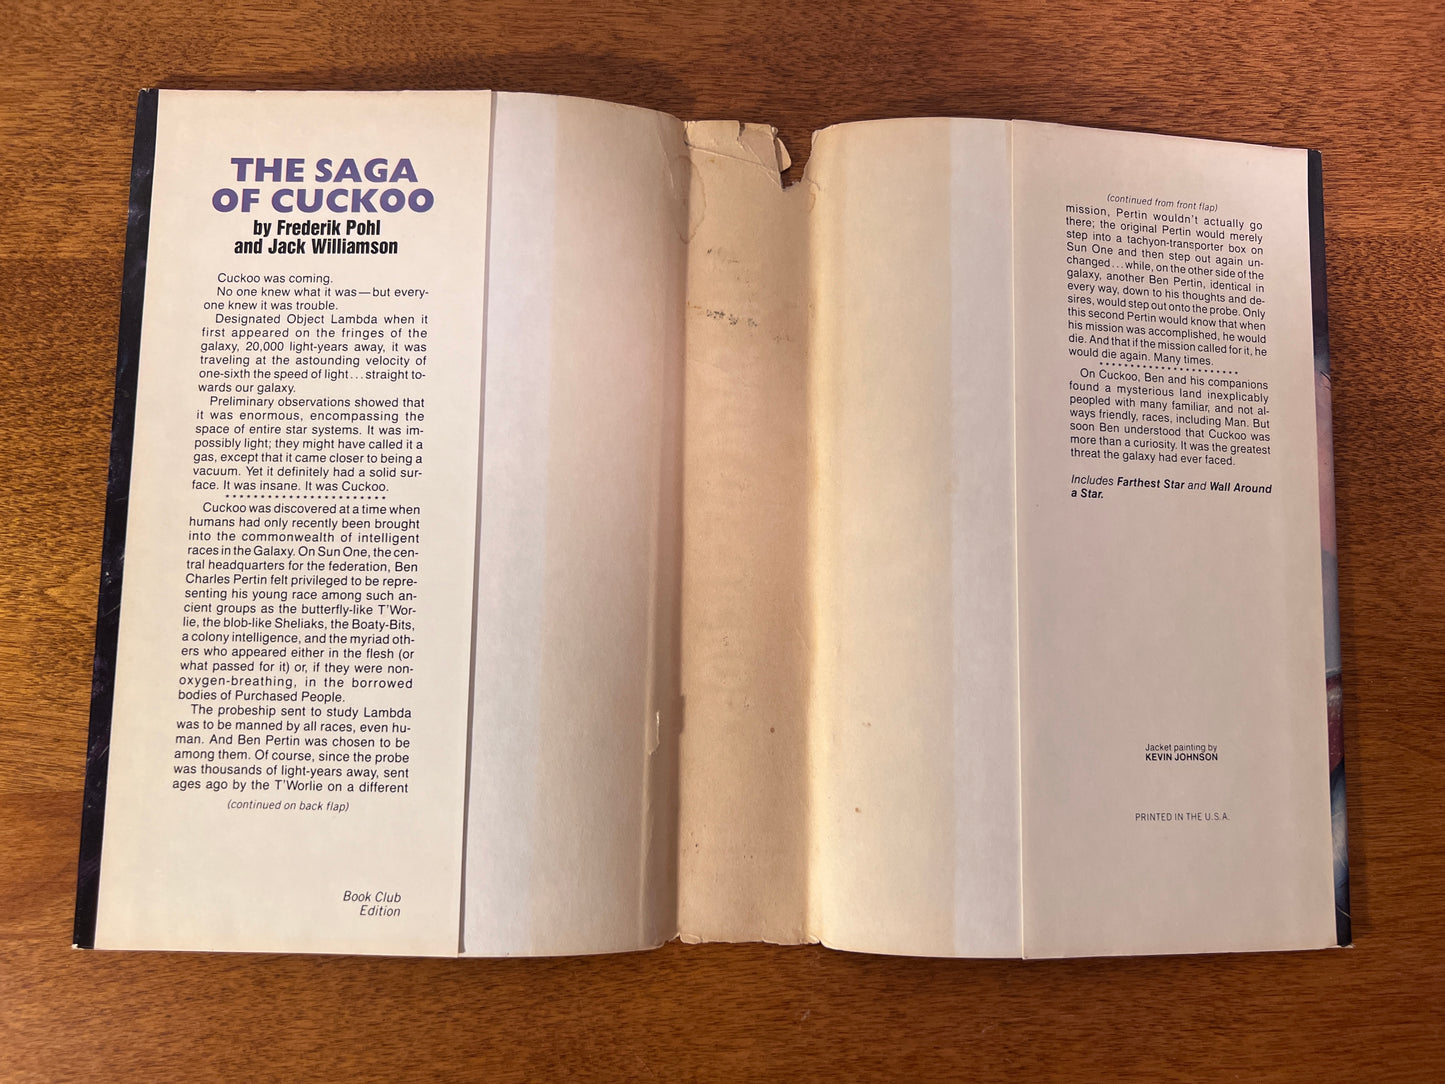 The Saga of Cuckoo by Frederick Pohl and Jack Williamson